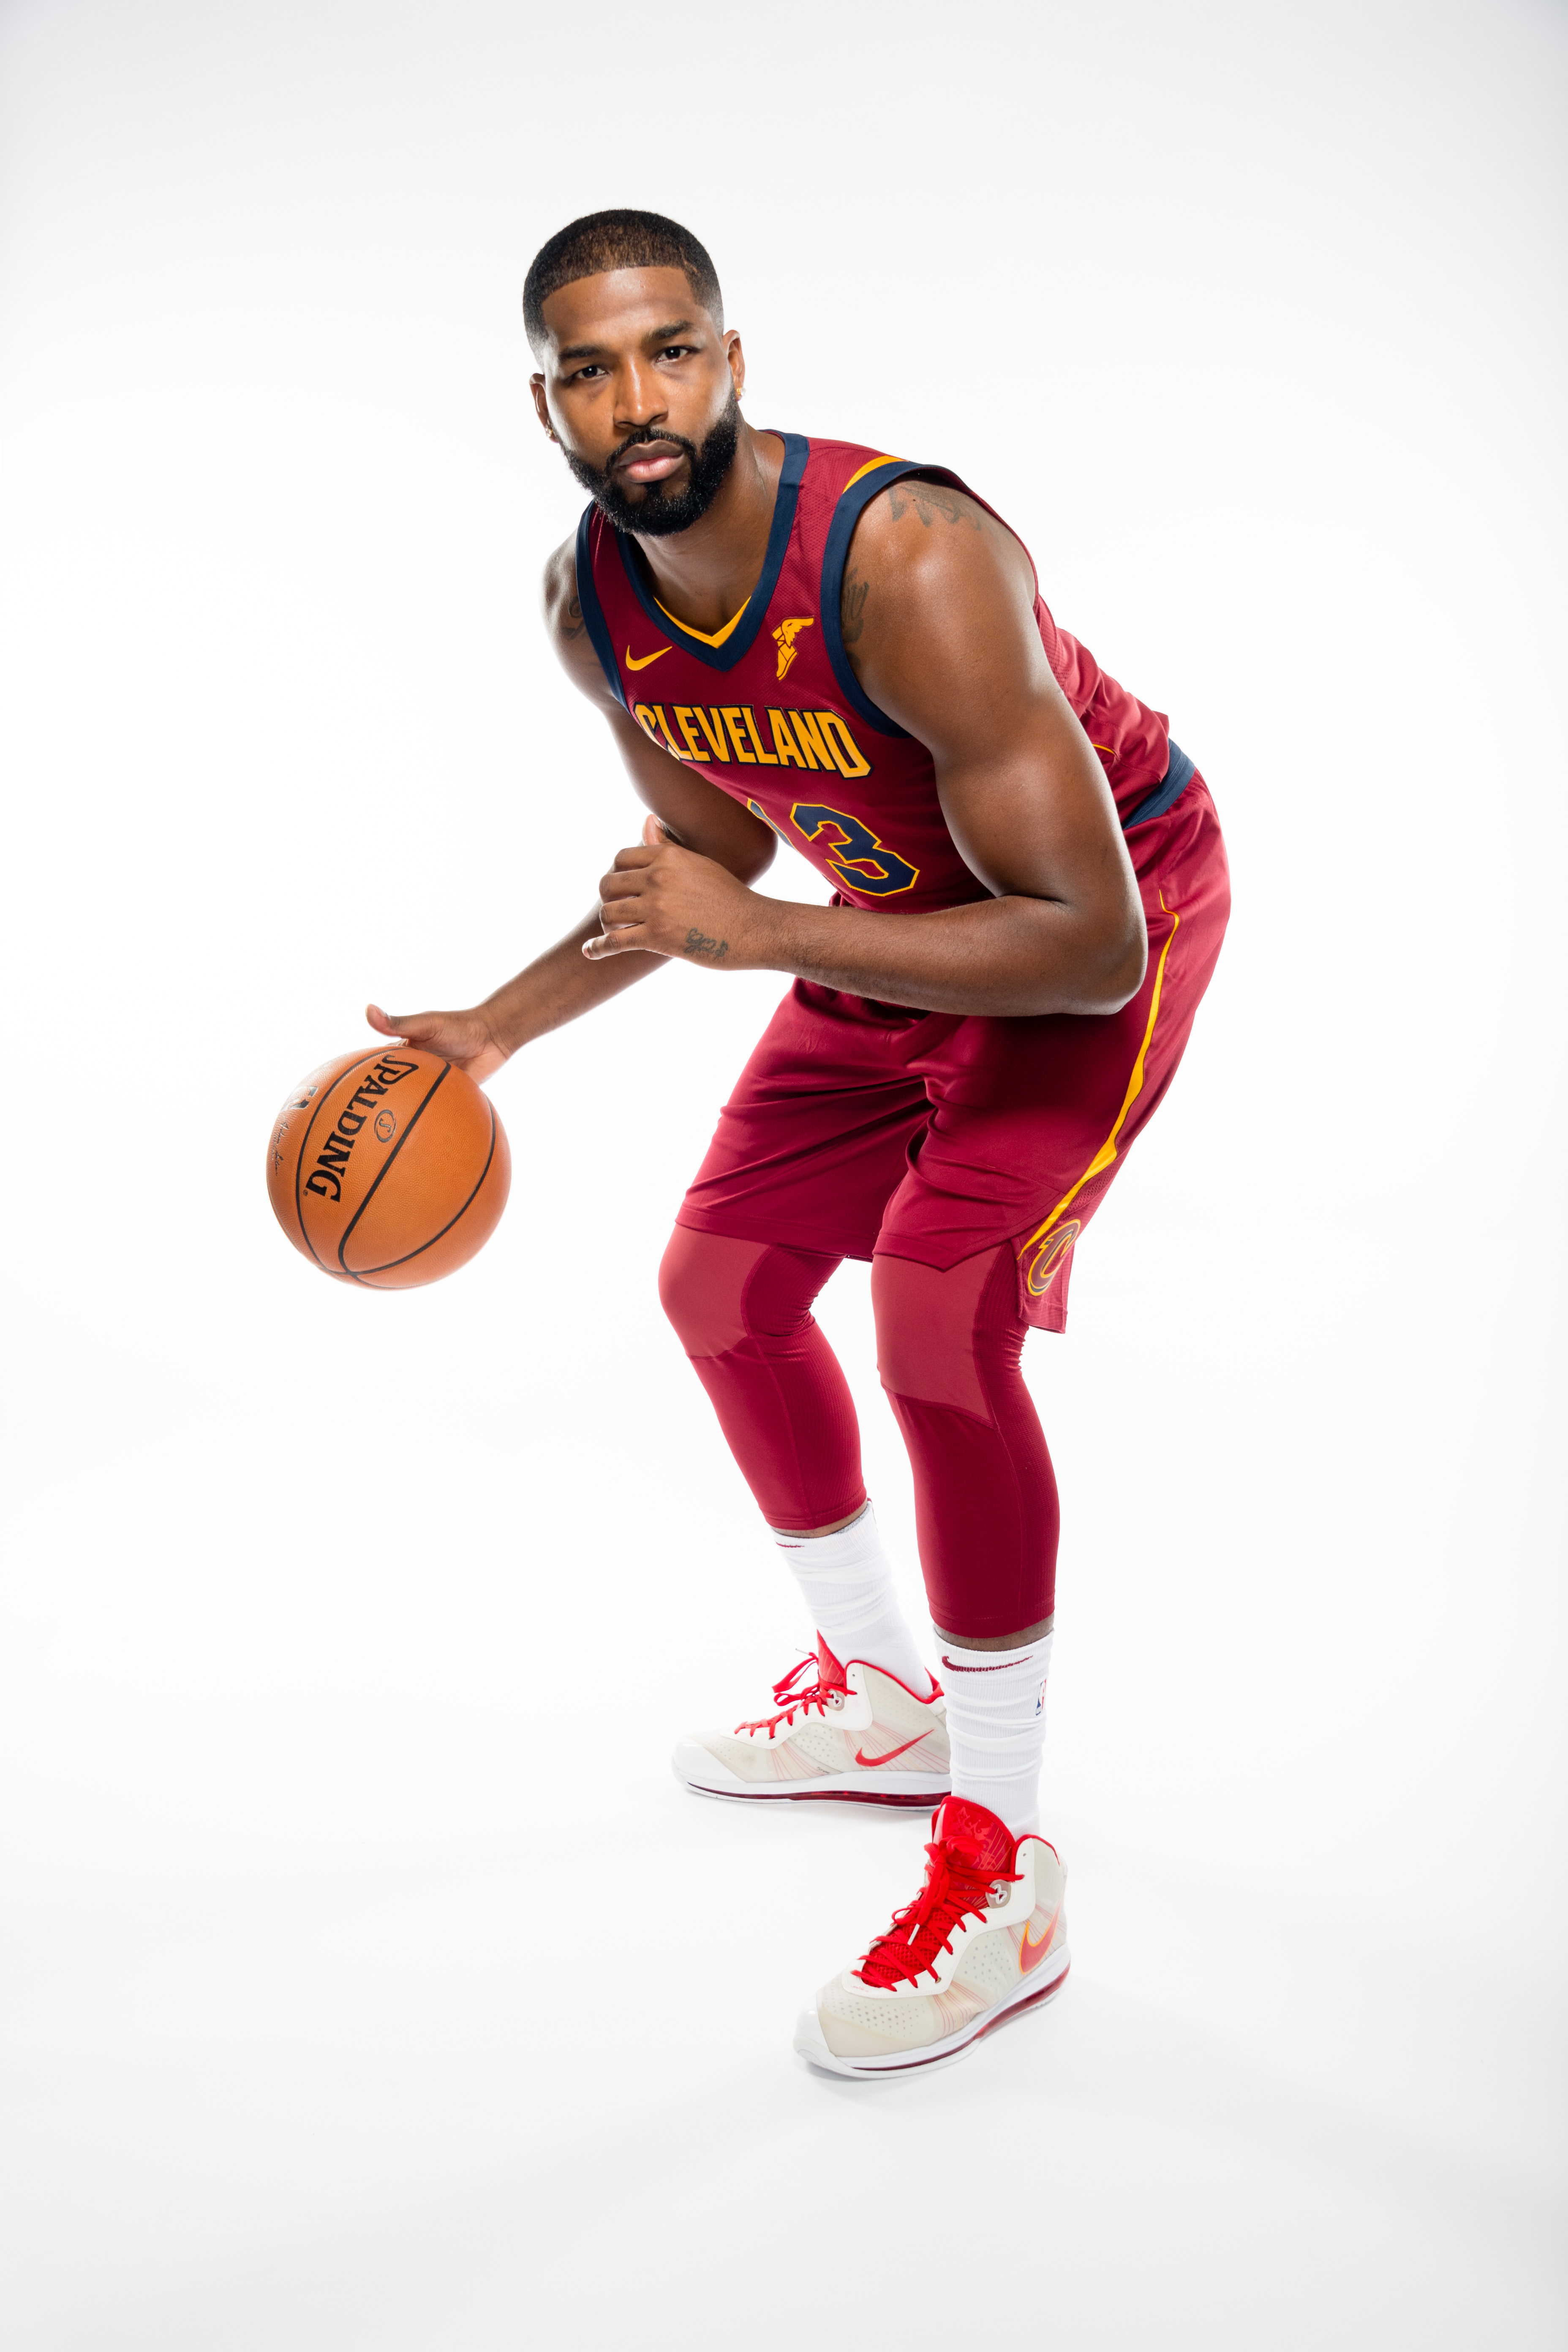 Tristan Thompson Salary & Current Contract Details